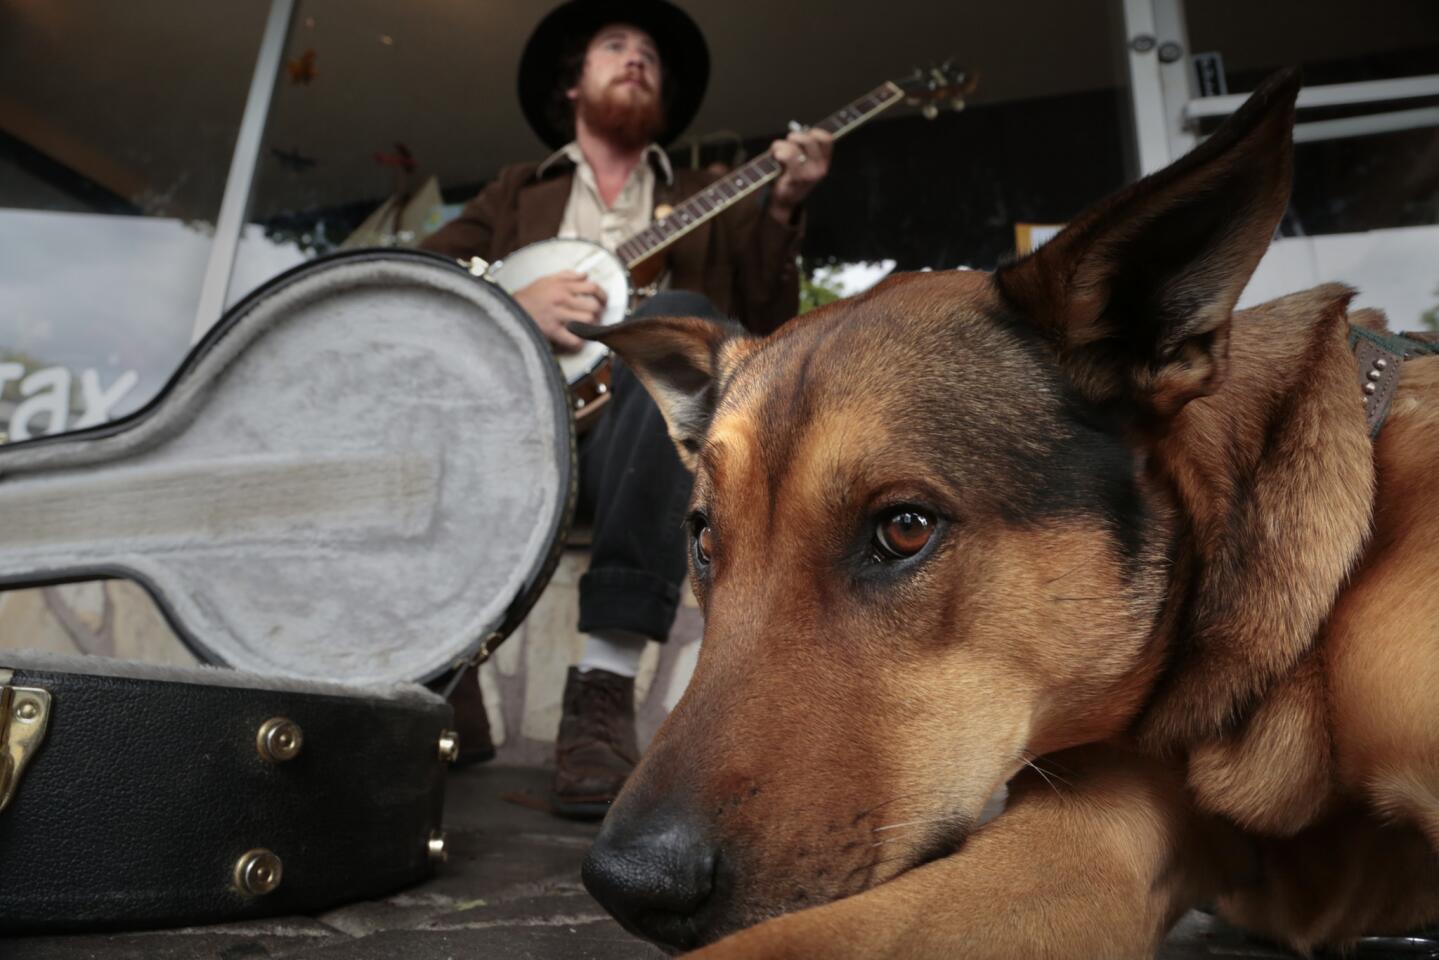 Street musician Cody Meyocks, 26, serenades passersby in Ashland, Ore.'s, downtown plaza. At his feet, his faithful -- and very chill -- dog.